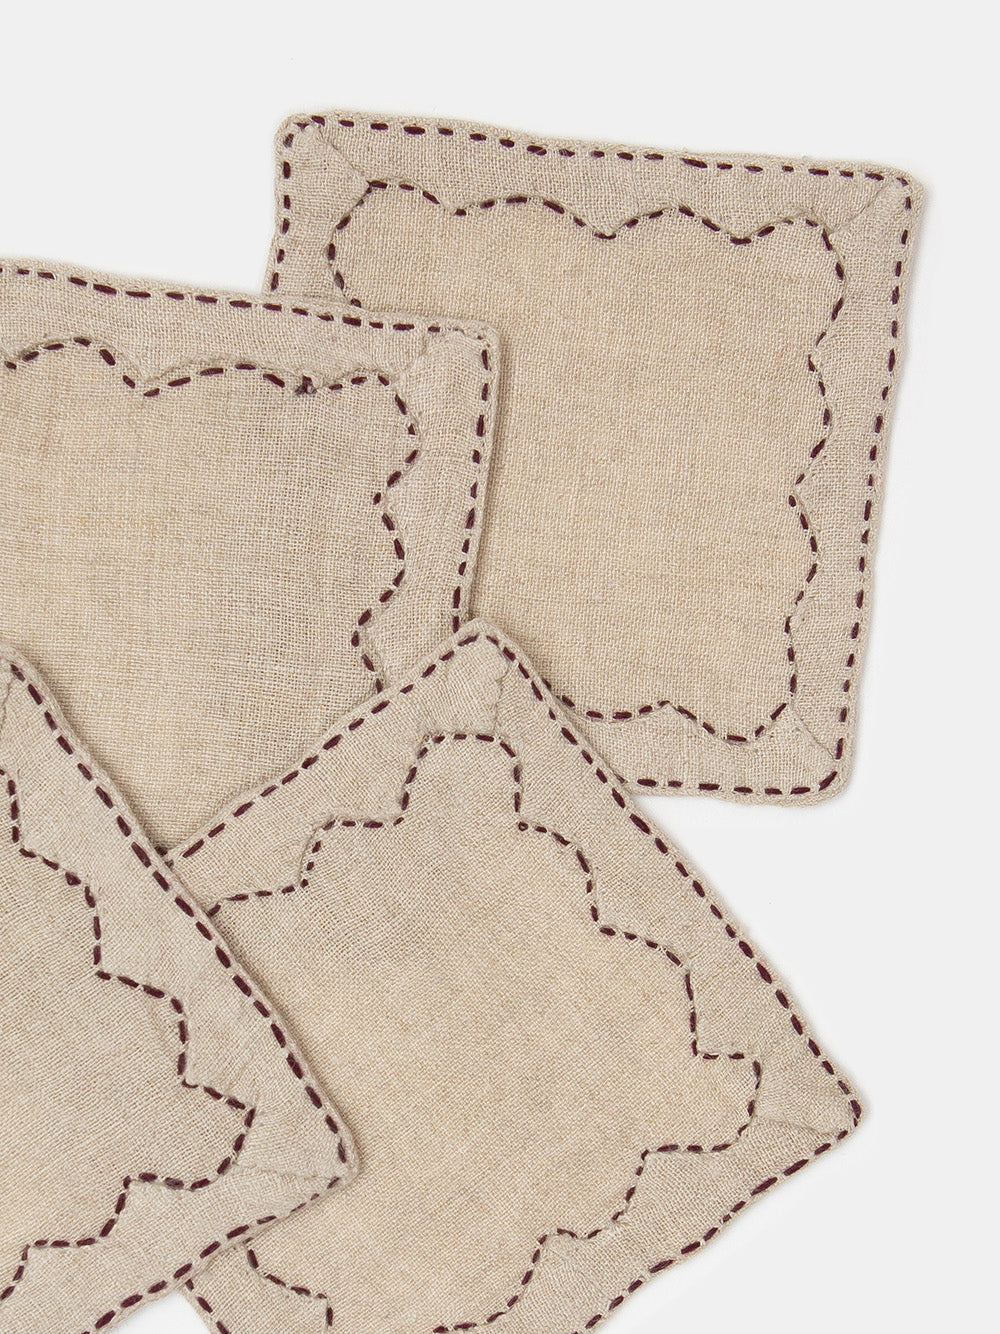 Set of 4 Mountain Coasters in Hand-embroidered Natural Linen